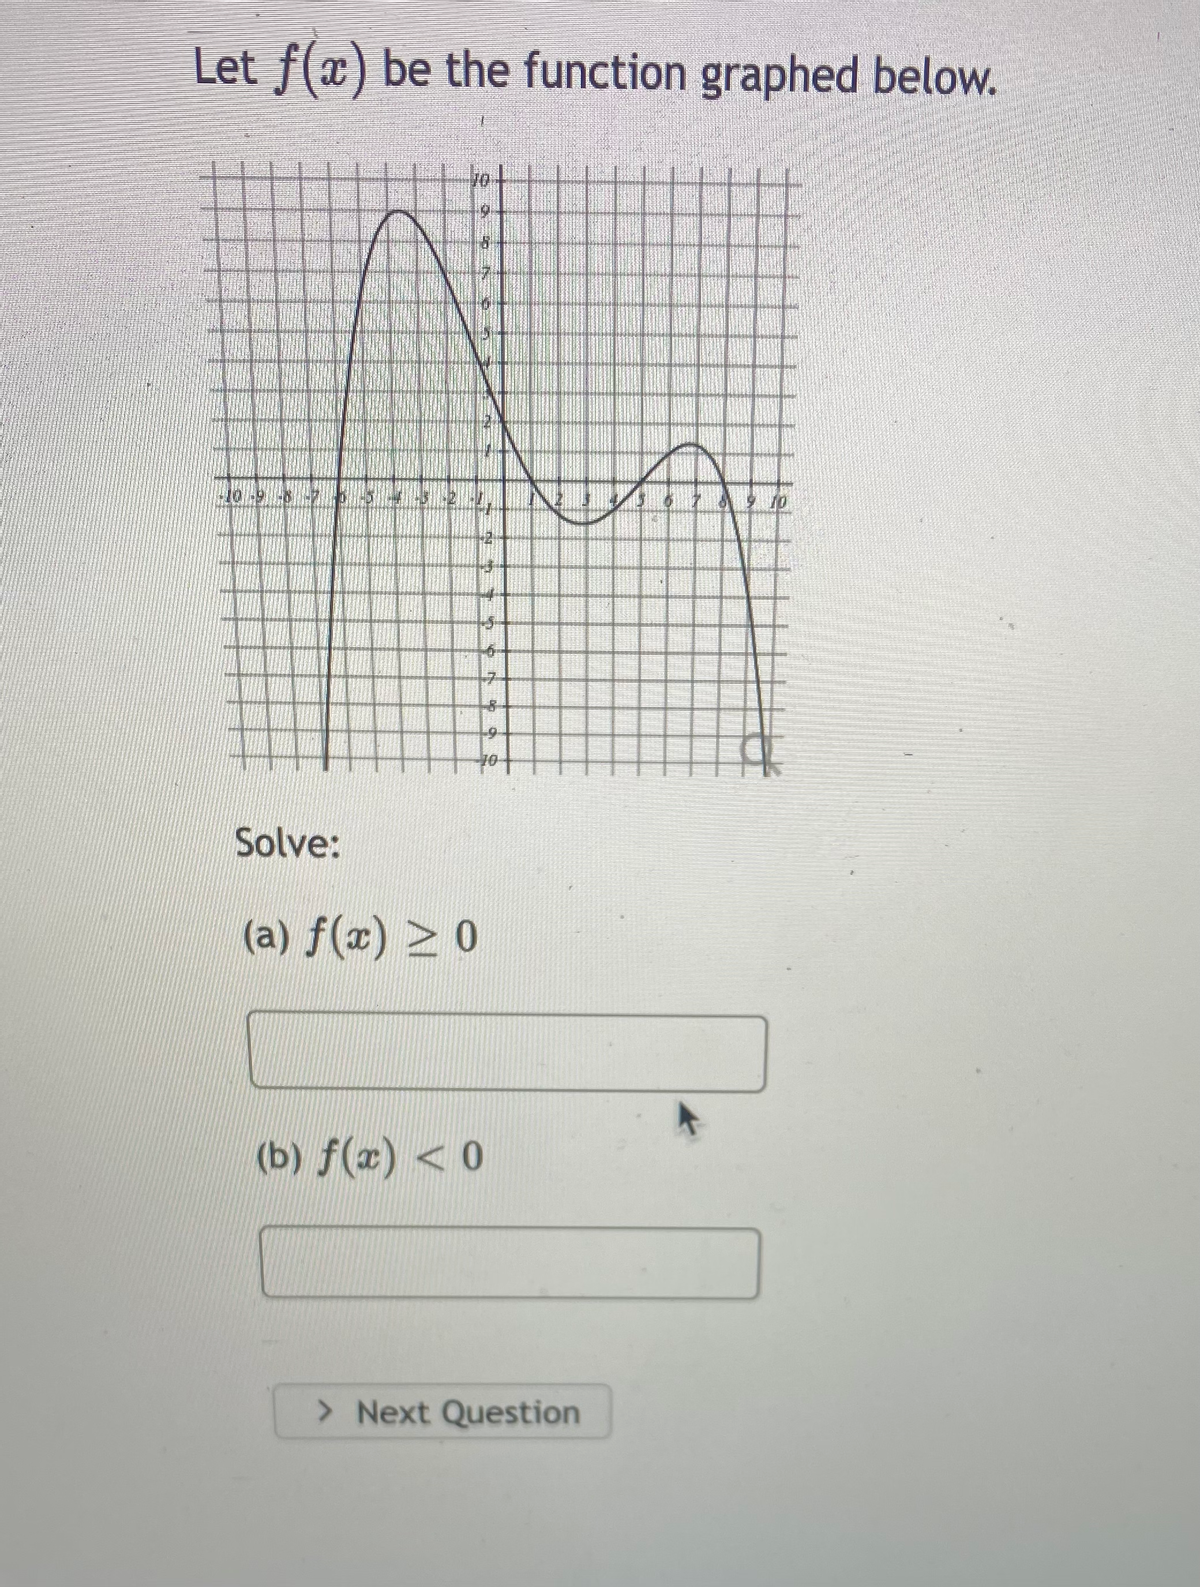 Let f(x) be the function graphed below.
Solve:
(a) f(x) >0
(b) f(x) < 0
> Next Question
